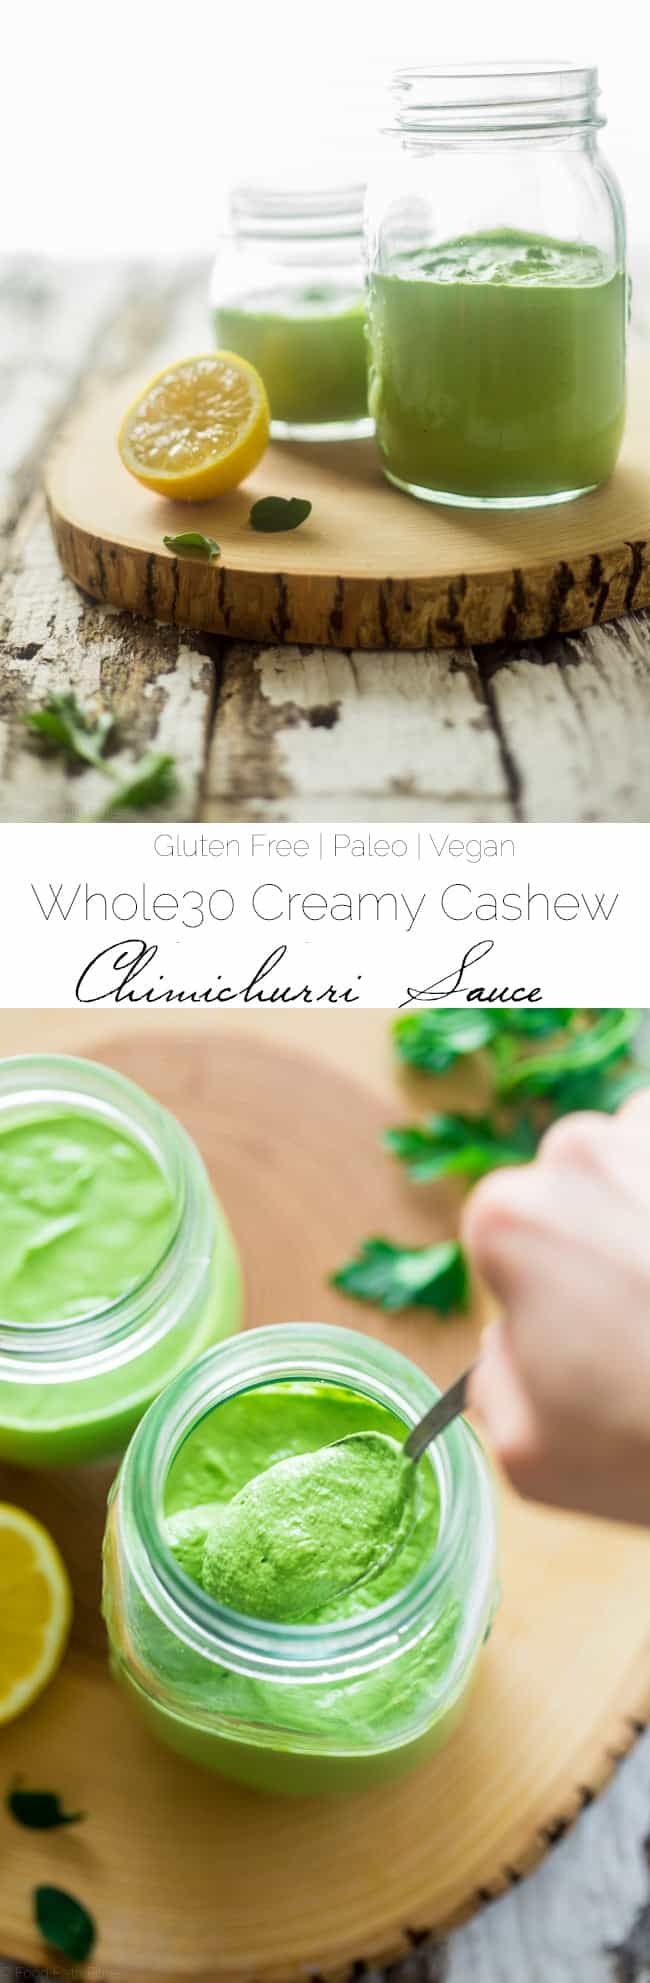 Whole30 Creamy Chimichurri Sauce - This chimichurri sauce uses a surprise ingredient to make it thick and creamy! It's a super easy, paleo, vegan and whole30 compliant addition to many meals! | Foodfaithfitness.com | @FoodFaithFit